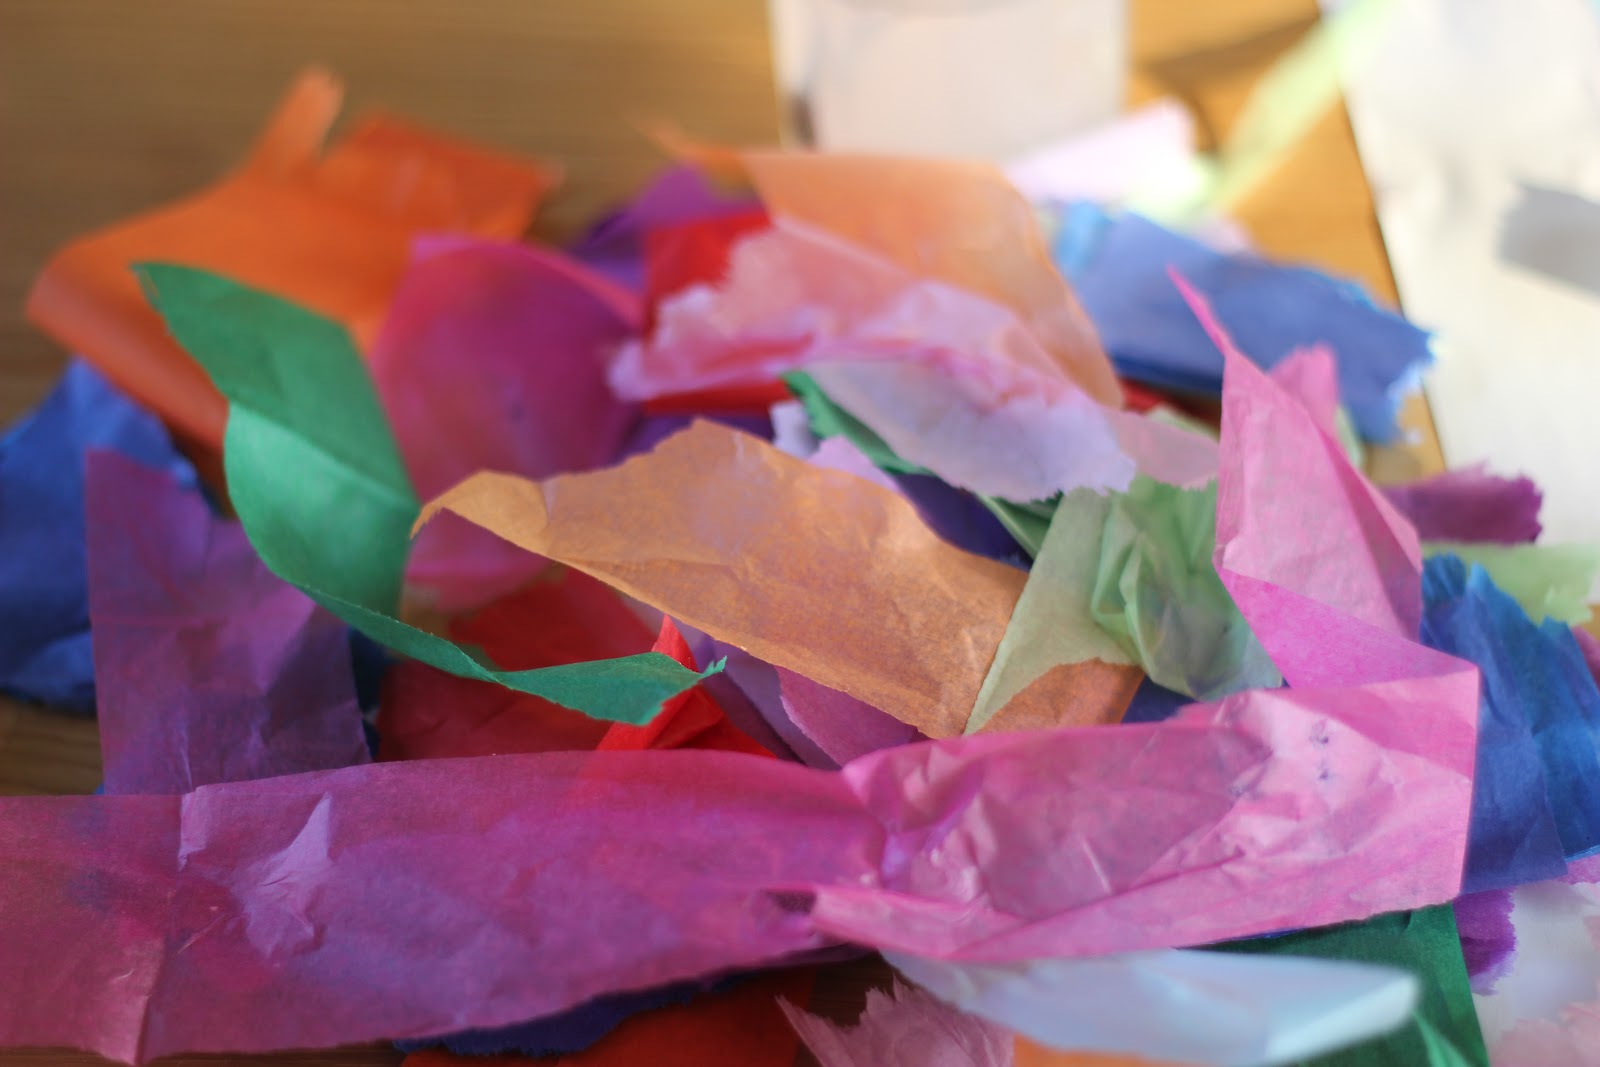 Tissue Paper Crafts for Kids - The Inspiration Board